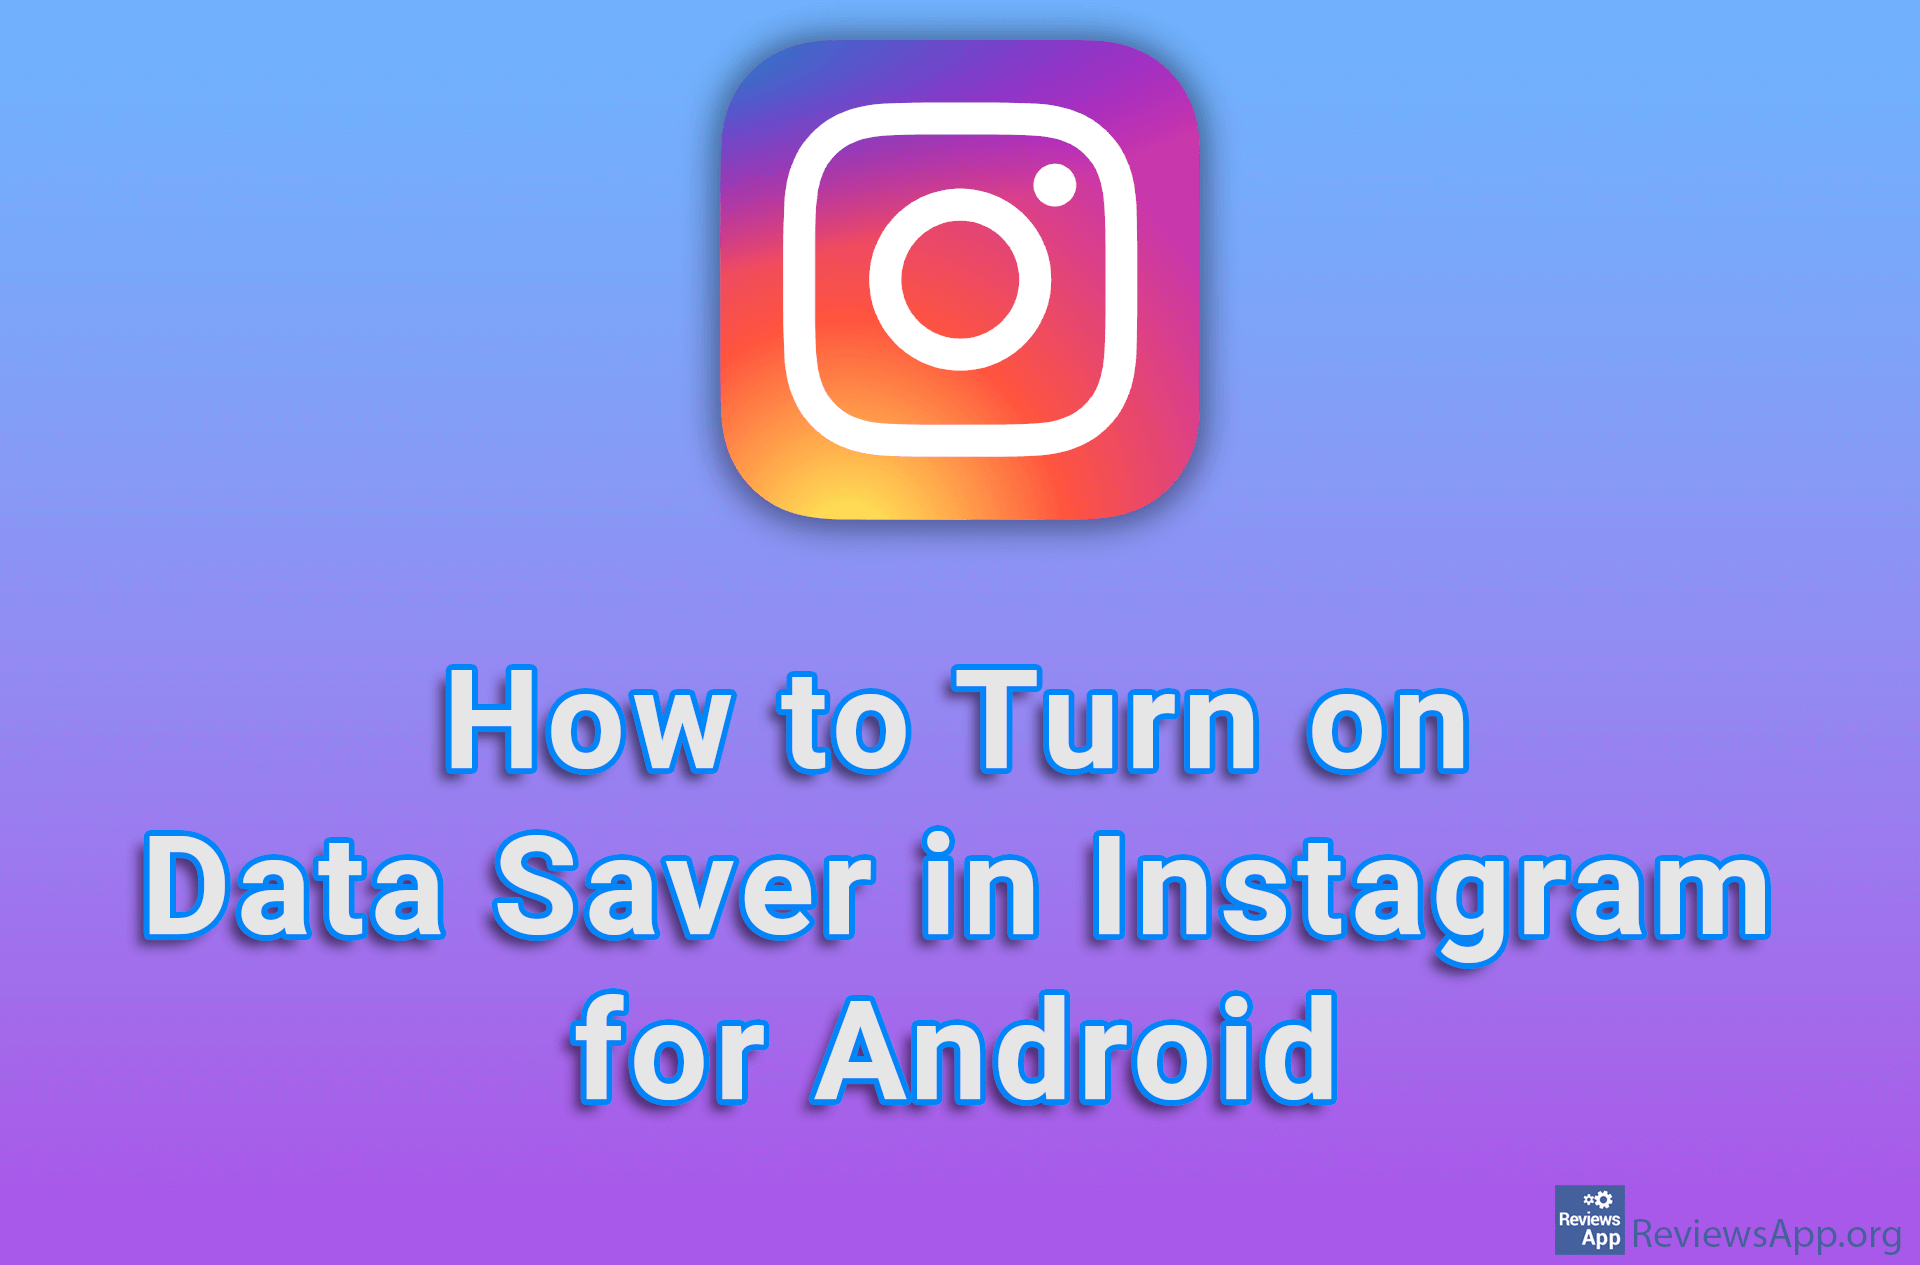 How to Turn on Data Saver in Instagram for Android